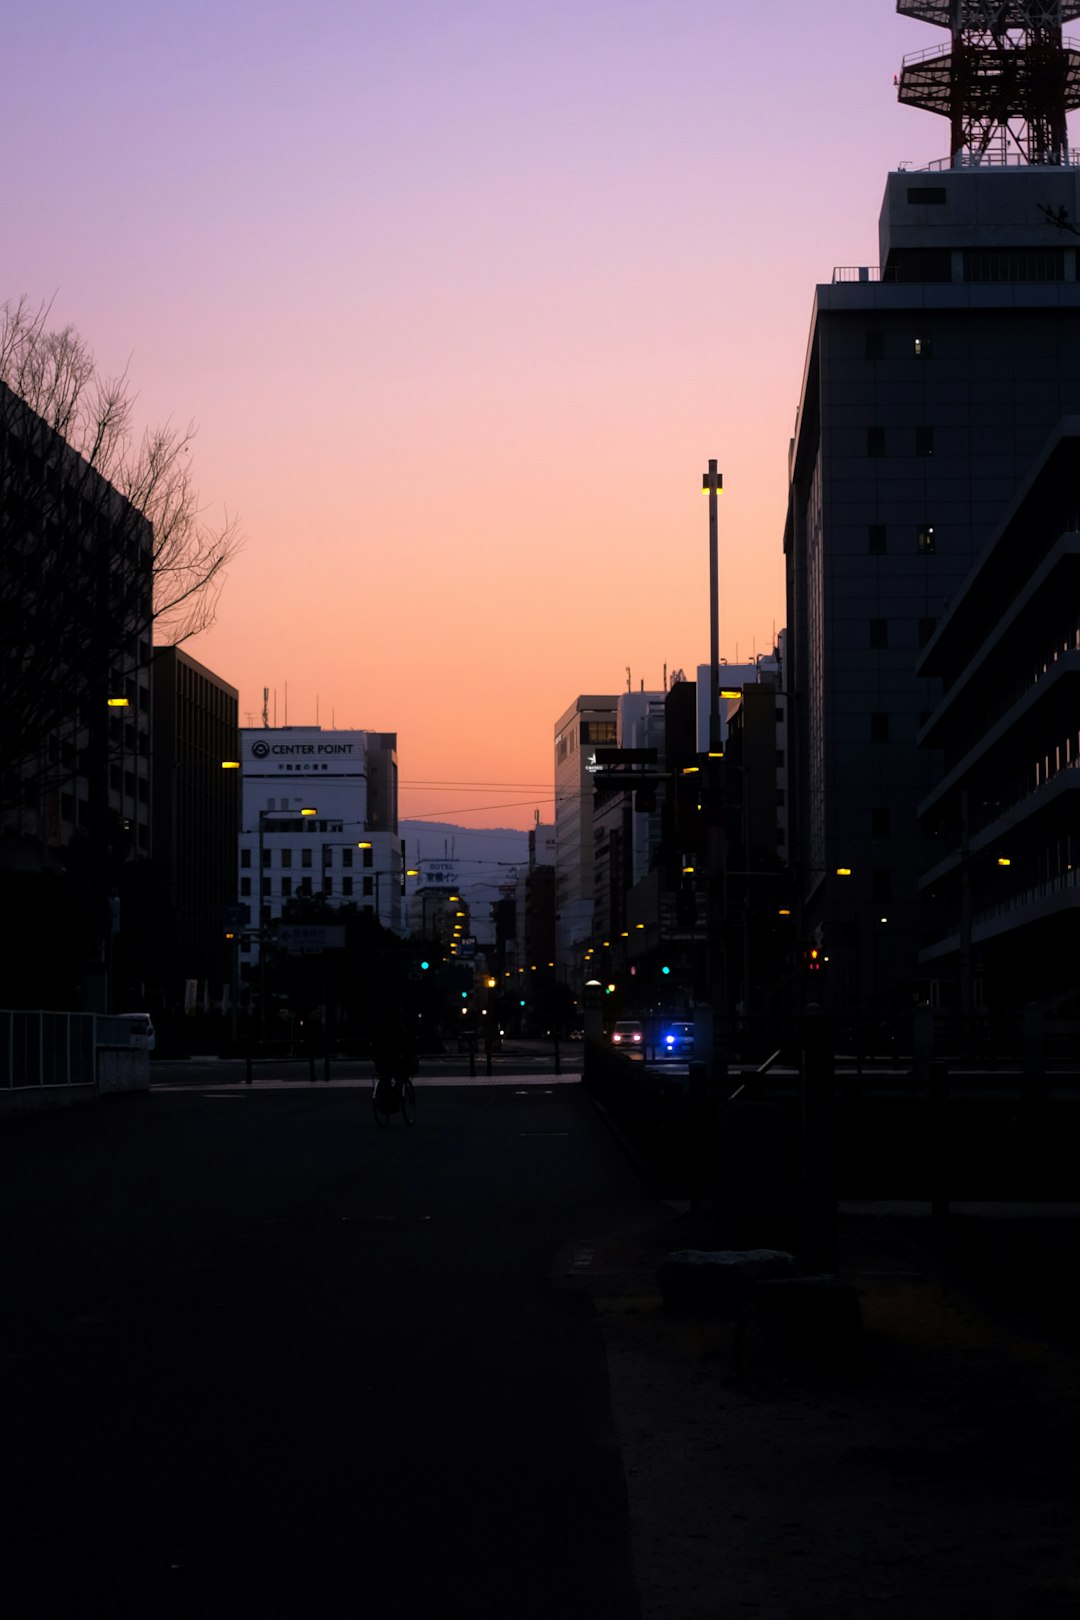 cars on road near buildings during sunset